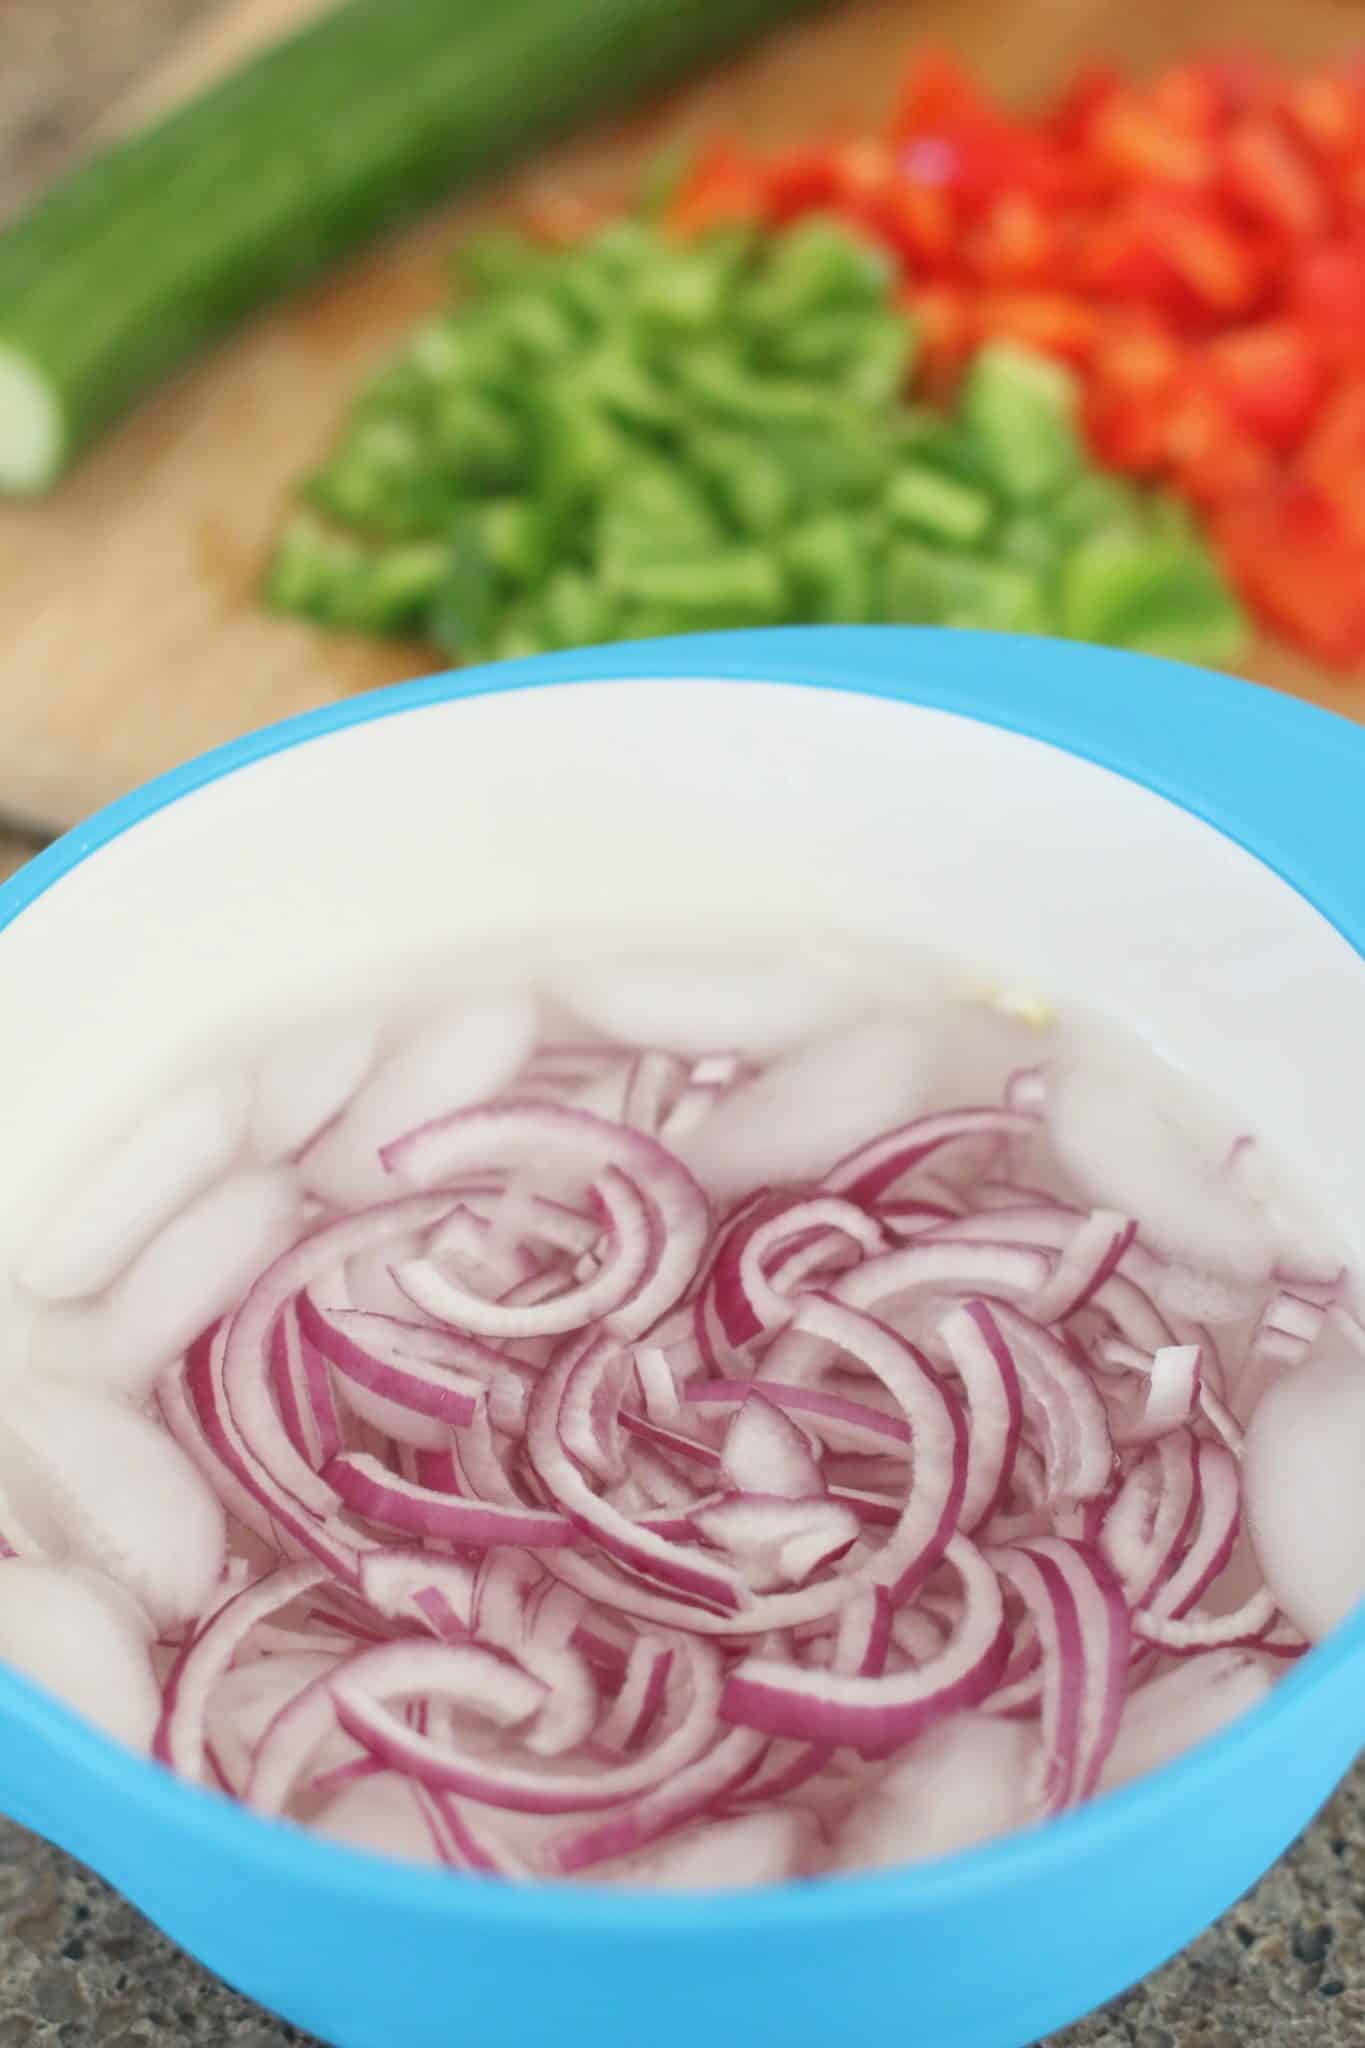 sliced red onions soaking in a bowl of ice water